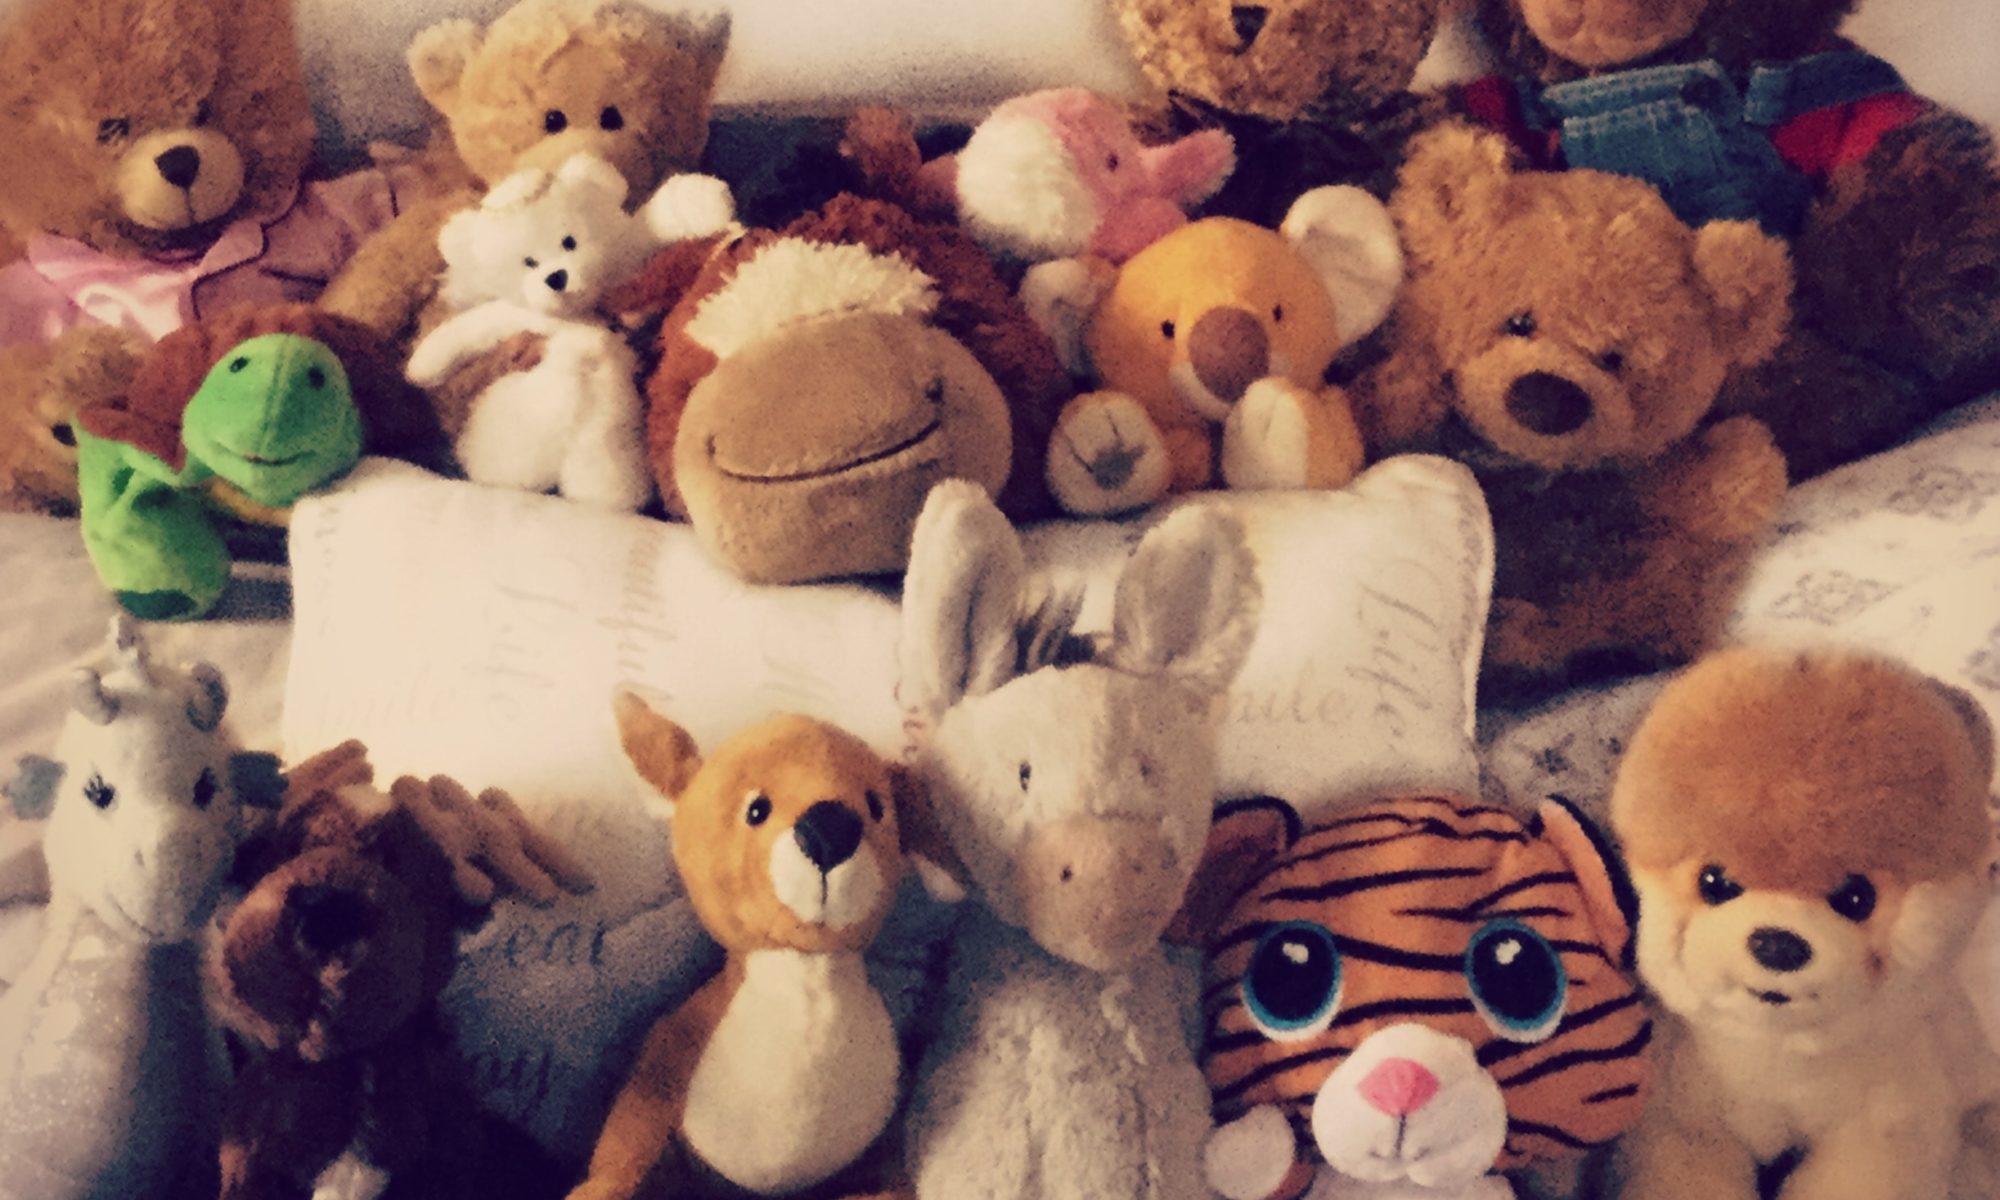 A collection of assorted stuffed animals sit of a bed facing the viewer, as if waiting patiently for play to begin.